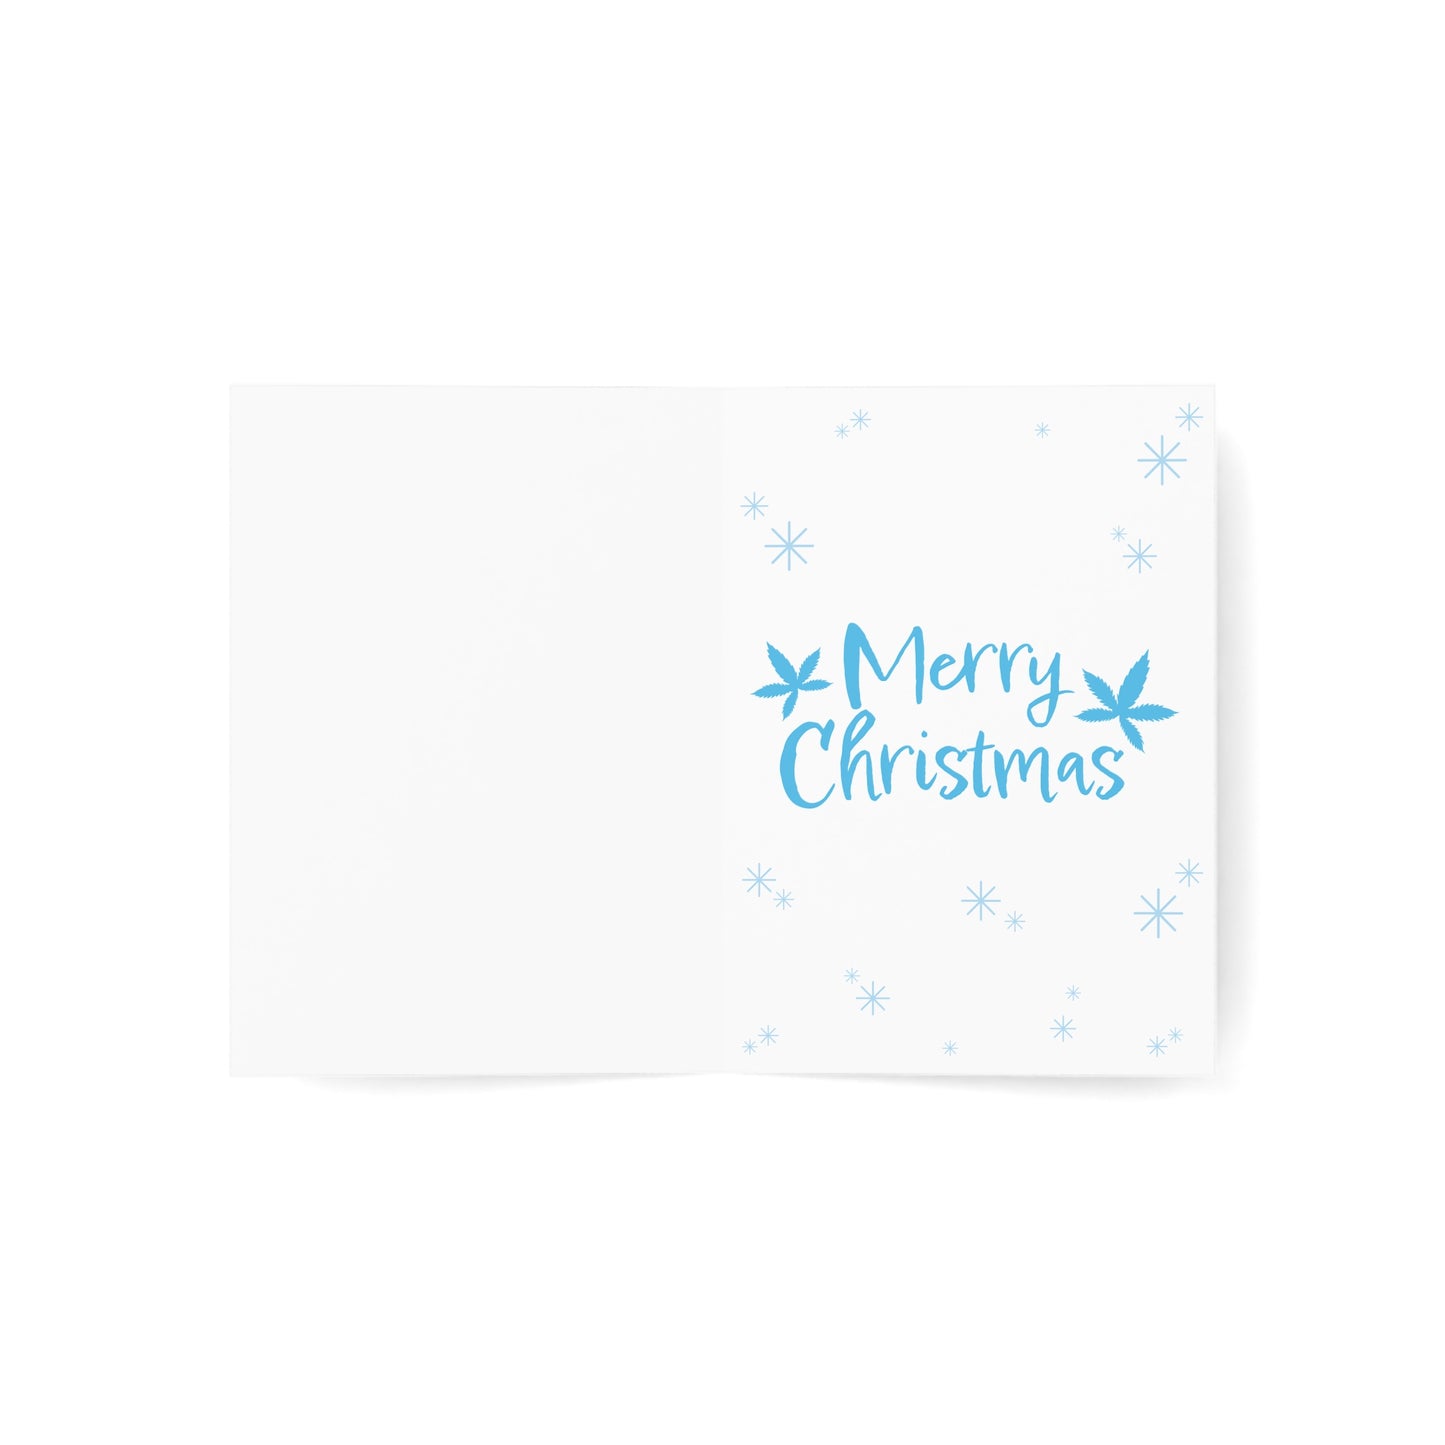 Open Potted Christmas Marijuana Plant Merry Christmas Greeting Card on a white background with "merry christmas" written in blue text, accompanied by blue snowflake designs, made from sustainable paper.